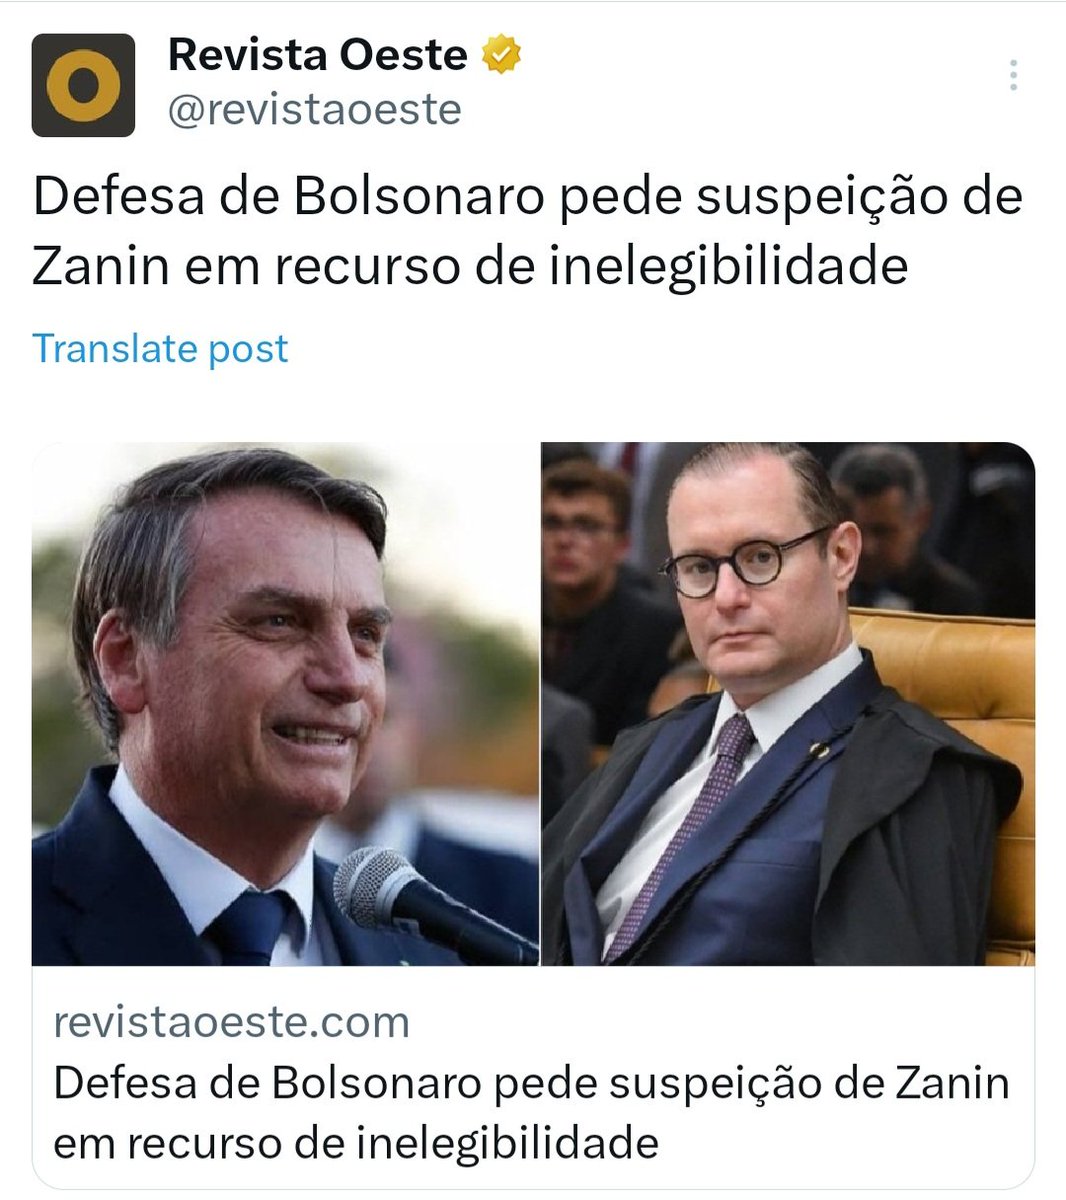 Breaking 🚨 🇧🇷 
'The STF judge Zanin, who is presiding over the case against Jair Bolsonaro, is a friend of Lula and also served as his former lawyer. They share an intimate and longstanding friendship.'

It is Bolsonaro's right to request that Judge Zanin recuse himself from